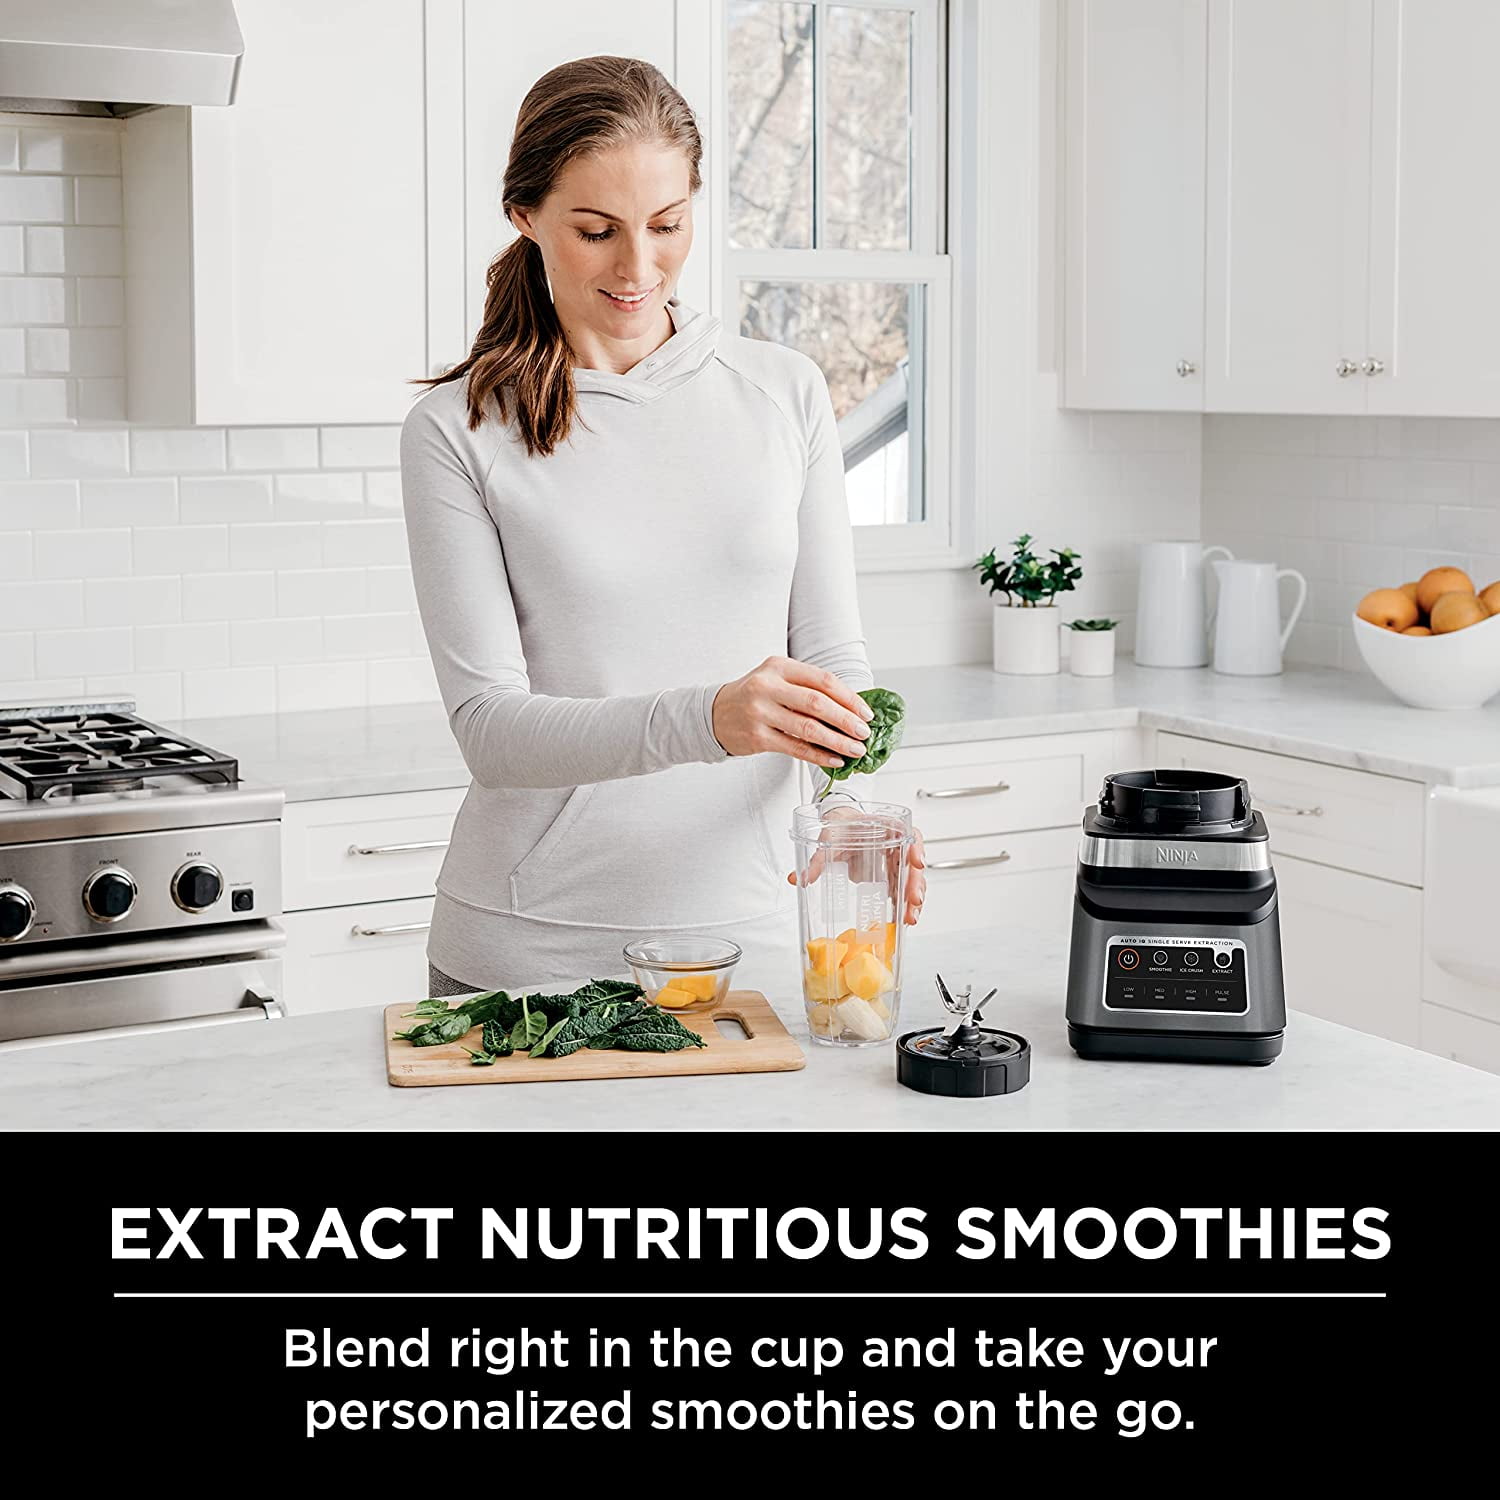  Ninja BN751 Professional Plus DUO Blender, 1400 Peak Watts, 3  Auto-IQ Programs for Smoothies, Frozen Drinks & Nutrient Extractions,  72-oz. Total Crushing Pitcher & (2) 24 oz. To-Go Cups, Black: Home